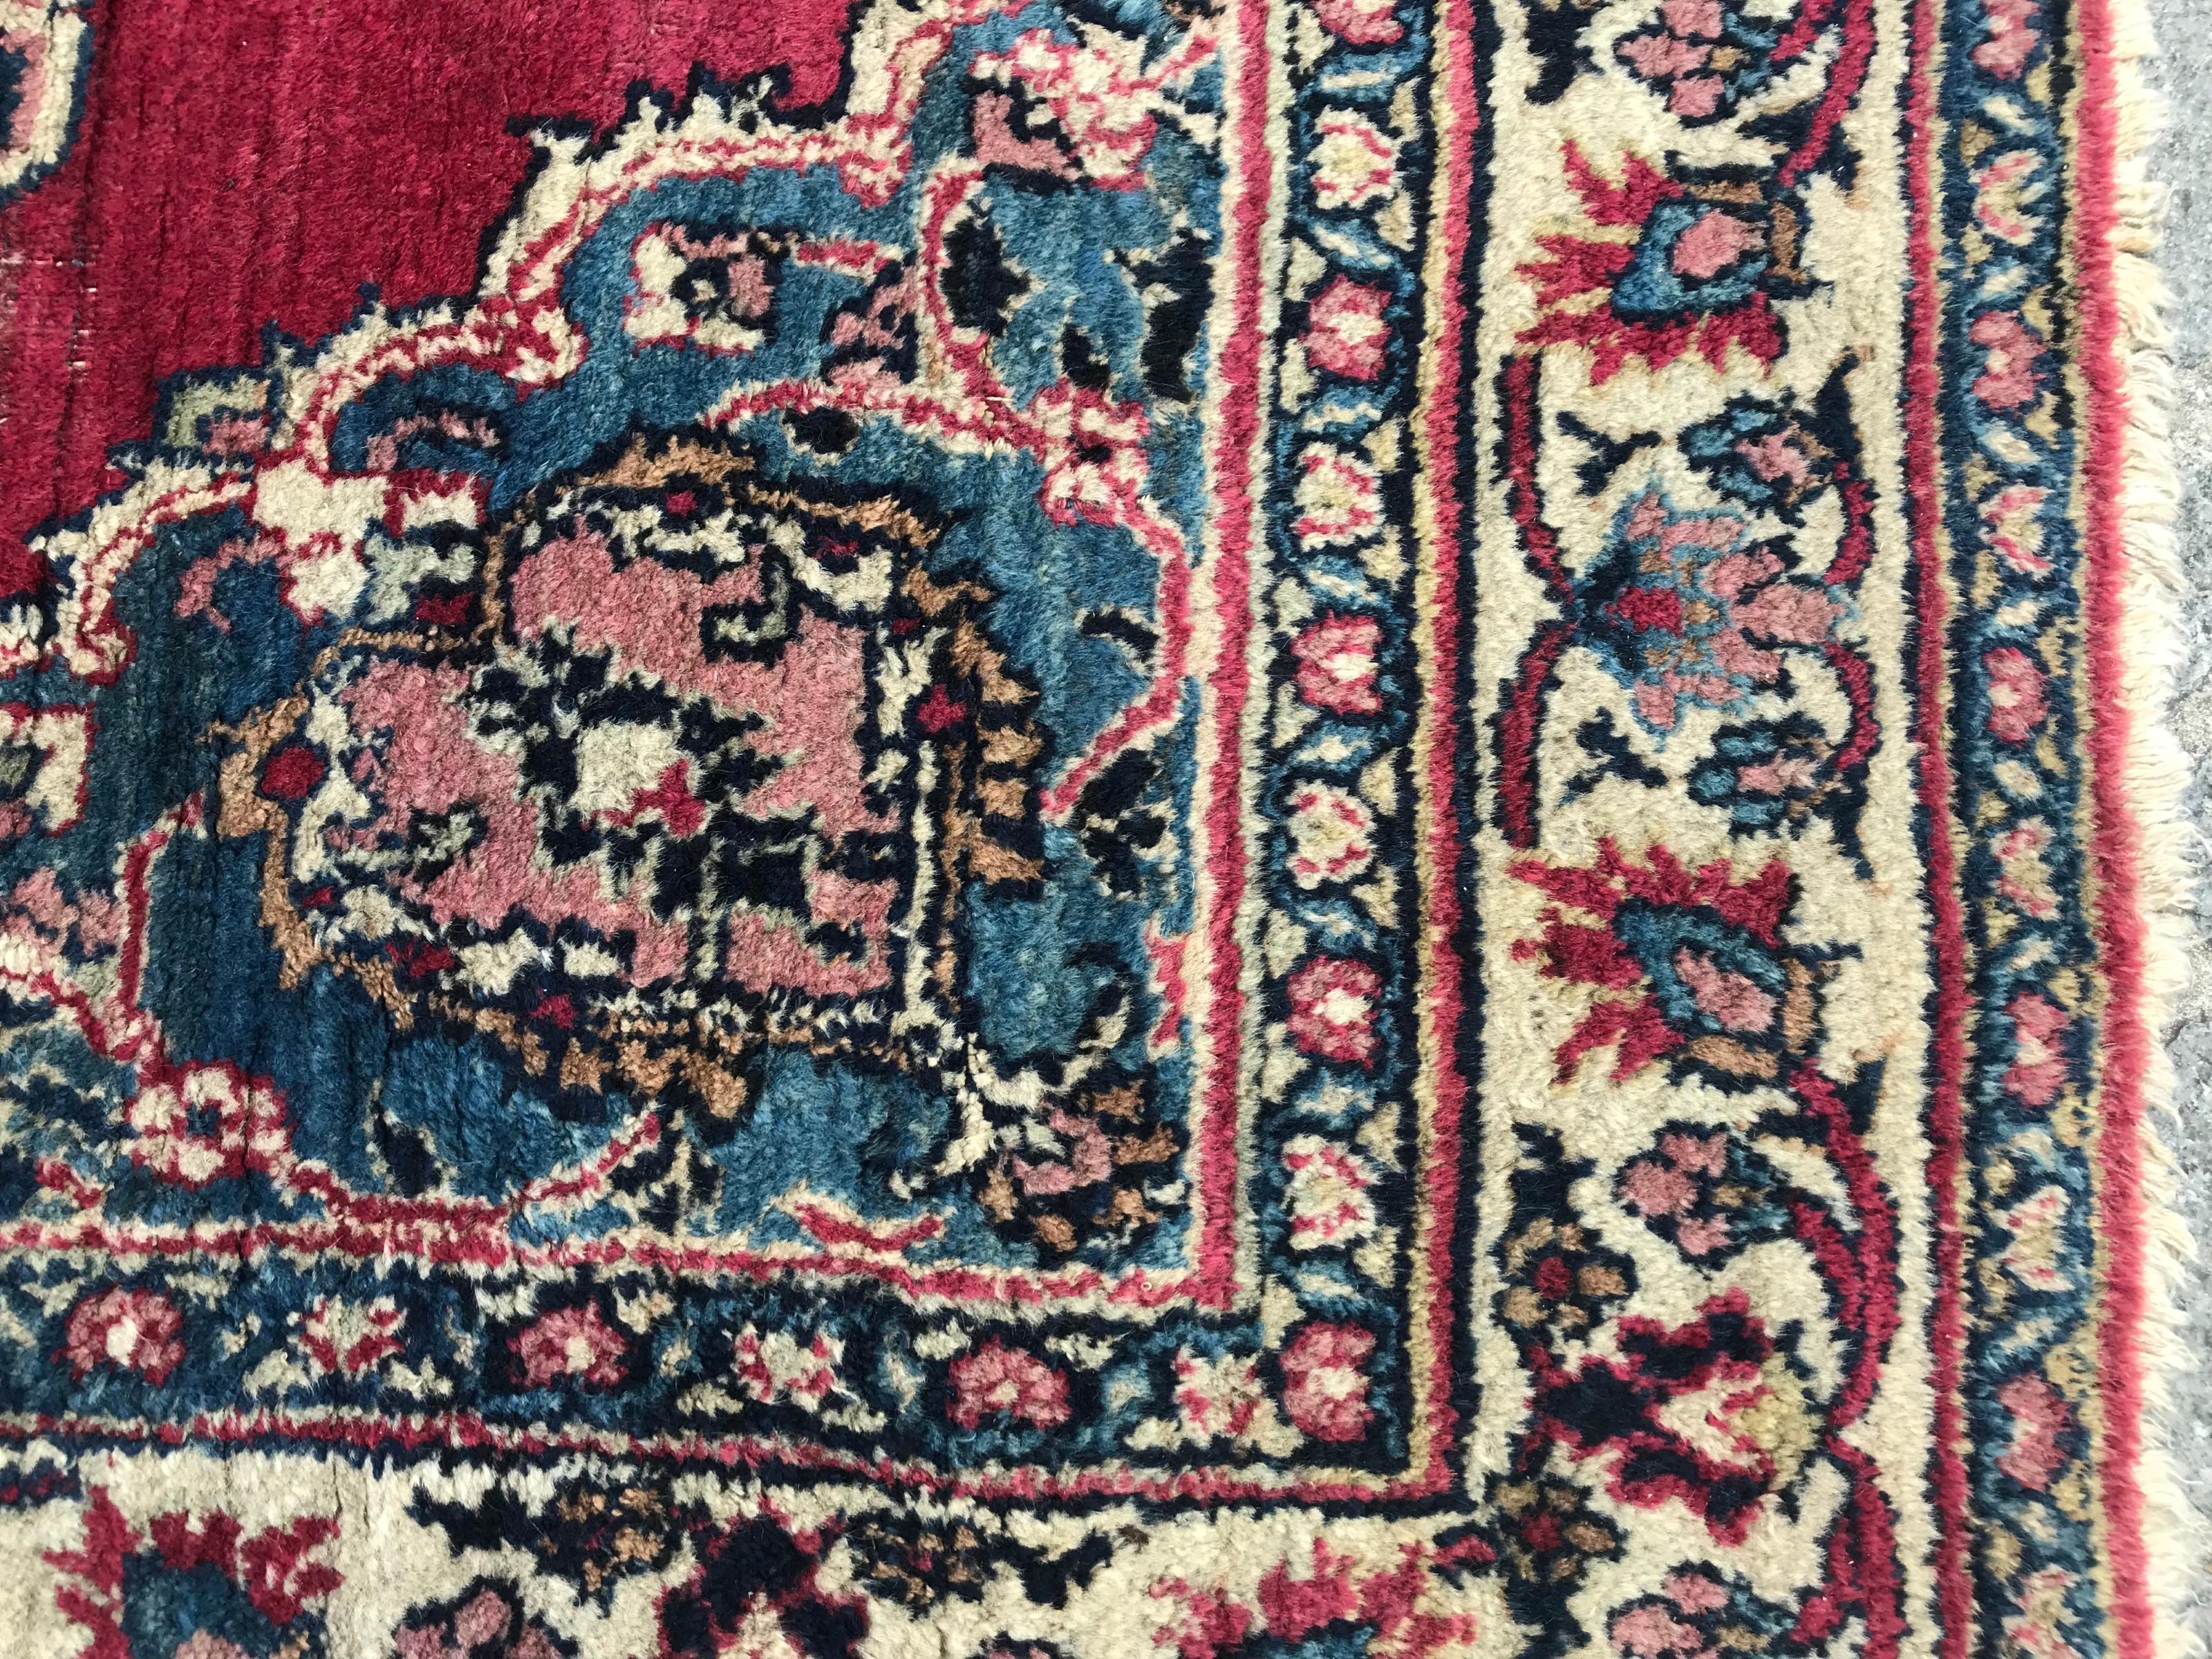 Beautiful late 19th century rug with a central medallion design and beautiful natural colors with blue, red and pink, entirely hand knotted with wool velvet on cotton foundation.